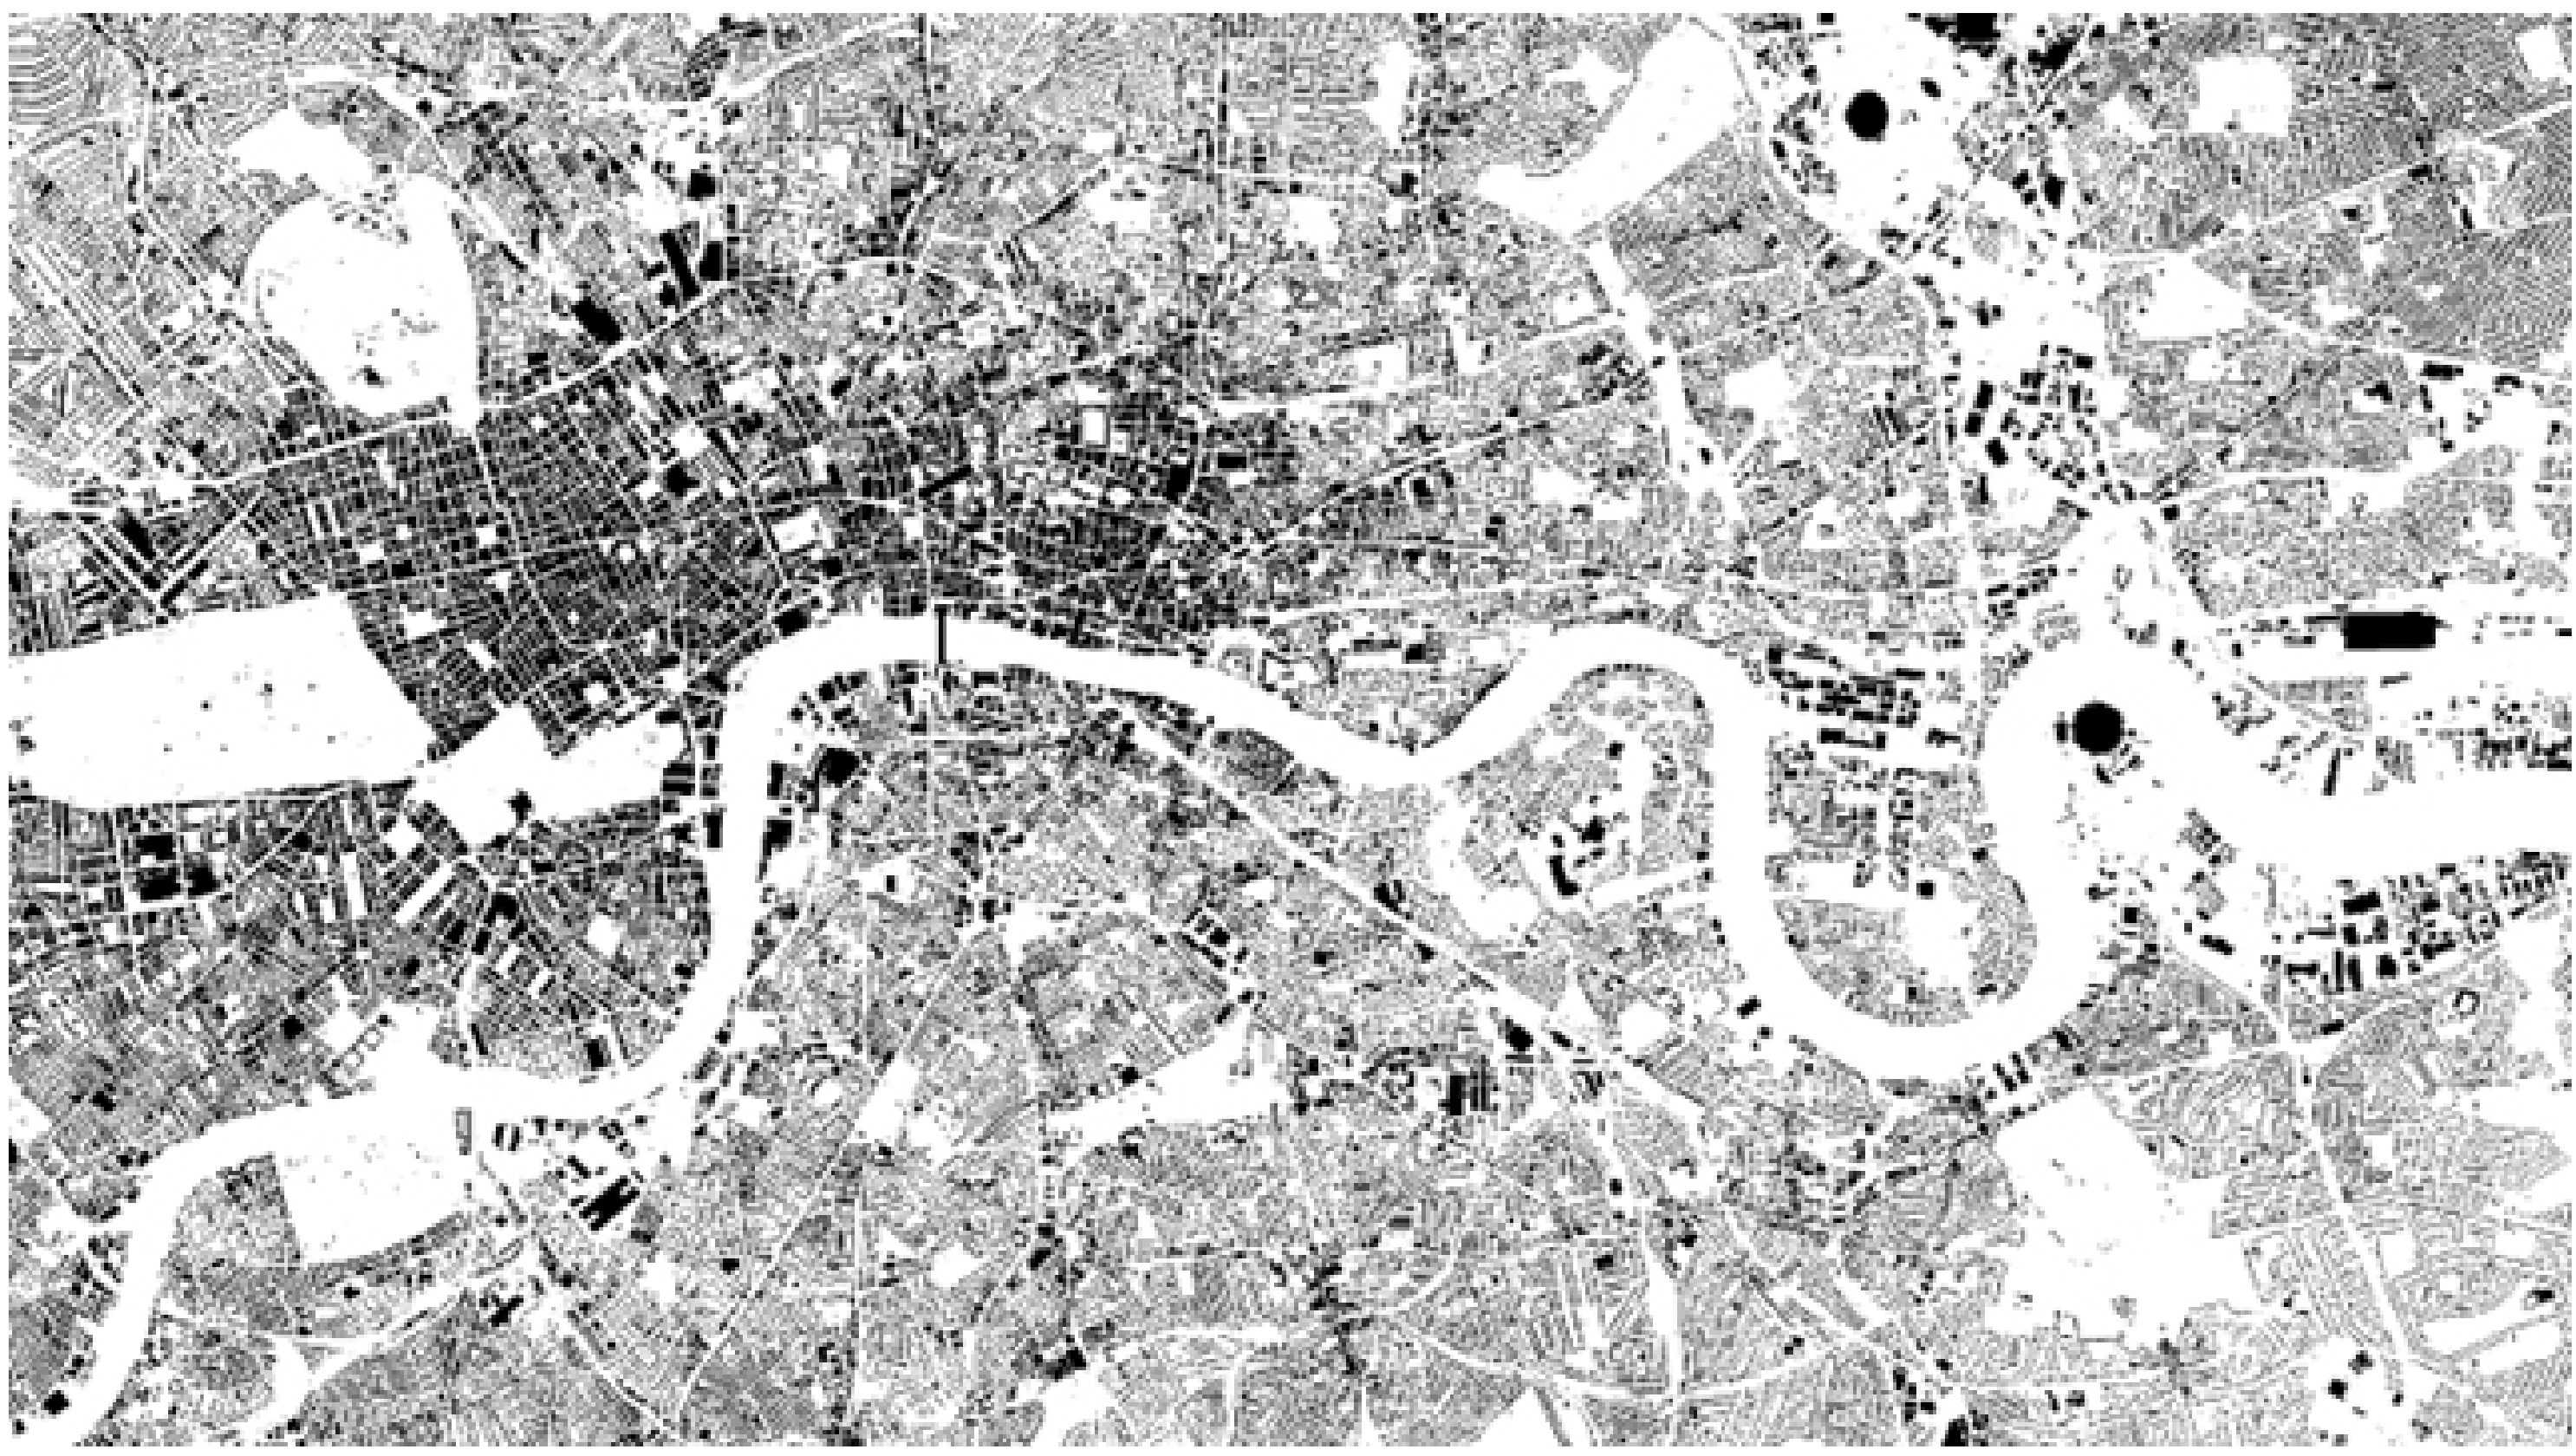 Buildings outlines that were used to locate receptor points in the 3D model for Central London.